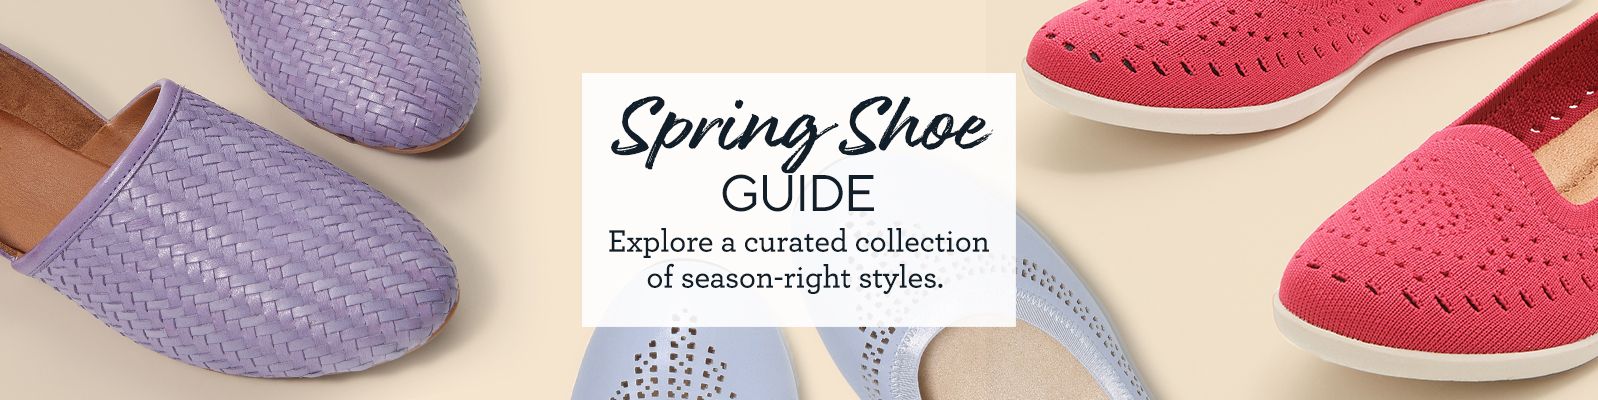 Spring Shoe Guide - Explore a curated collection of season-right styles. 